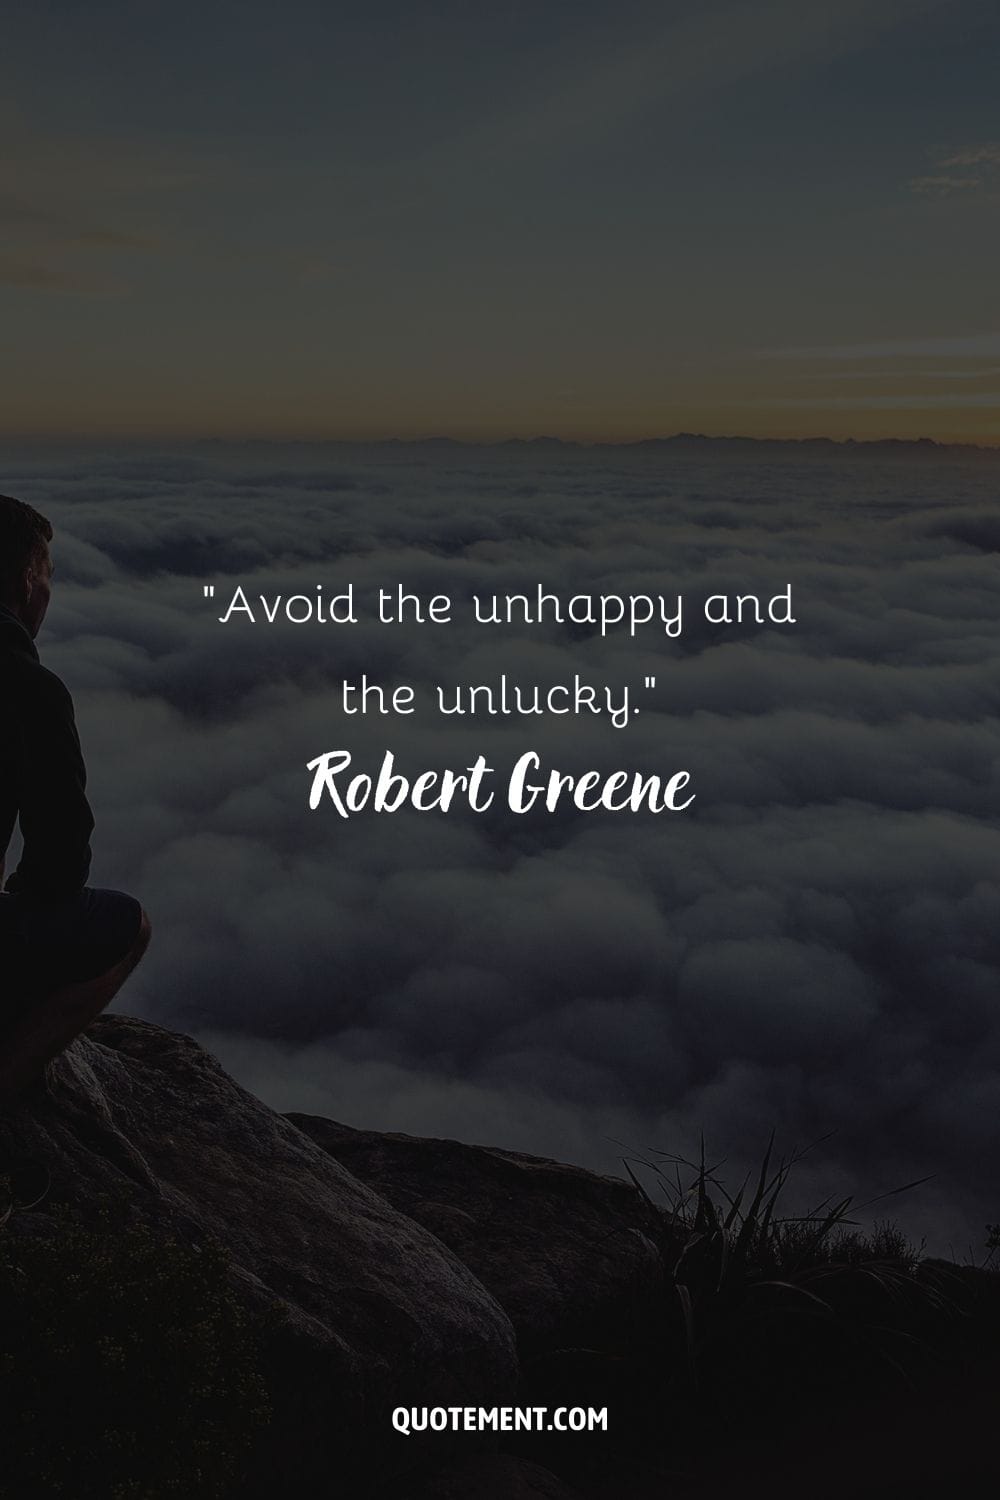 “Avoid the unhappy and the unlucky.” ― Robert Greene, The 48 Laws of Power